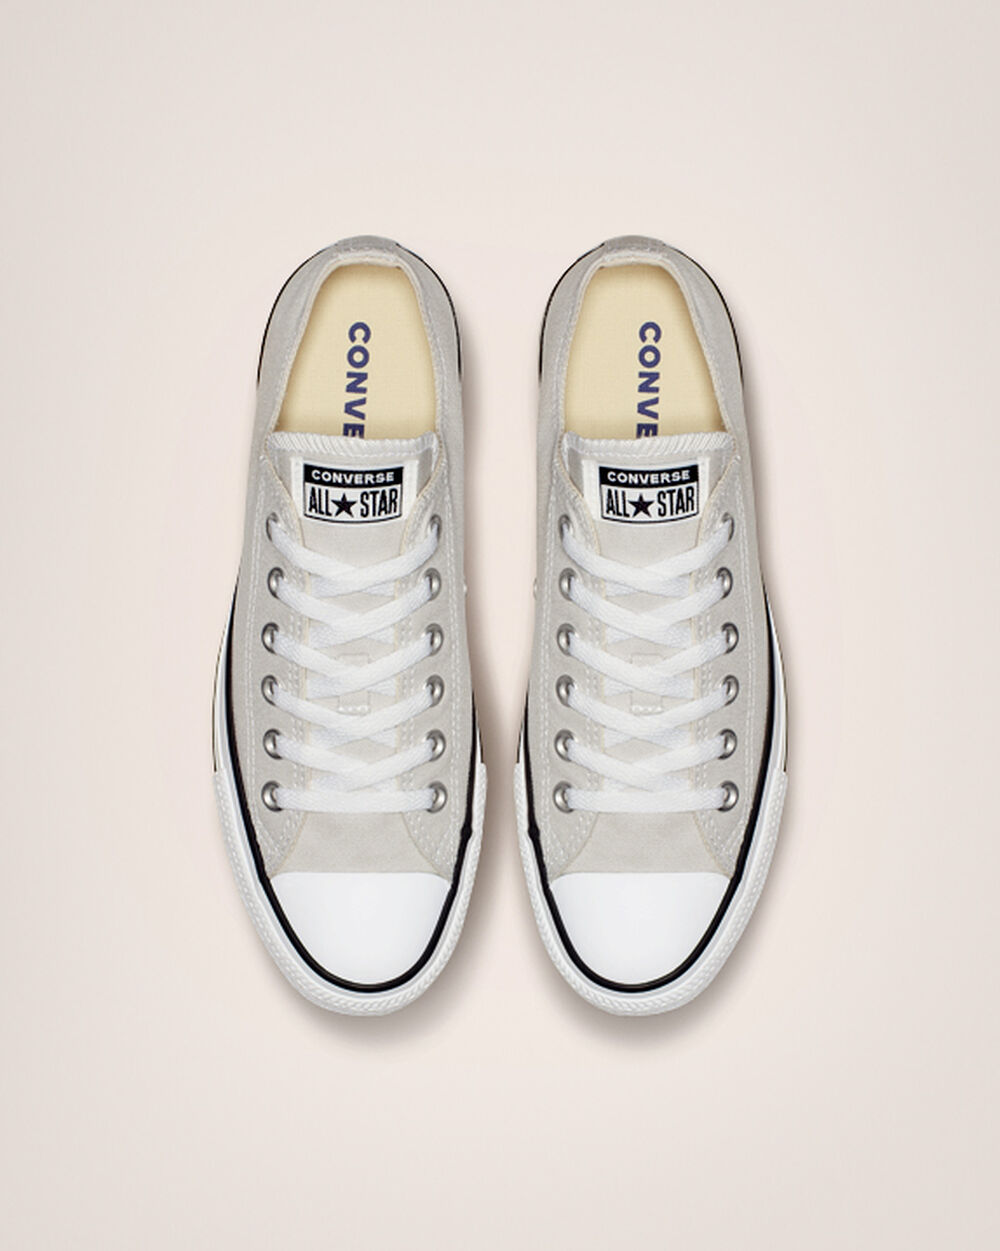 Tenis Converse Chuck Taylor All Star Mujer Grises Claro | Mexico-350646